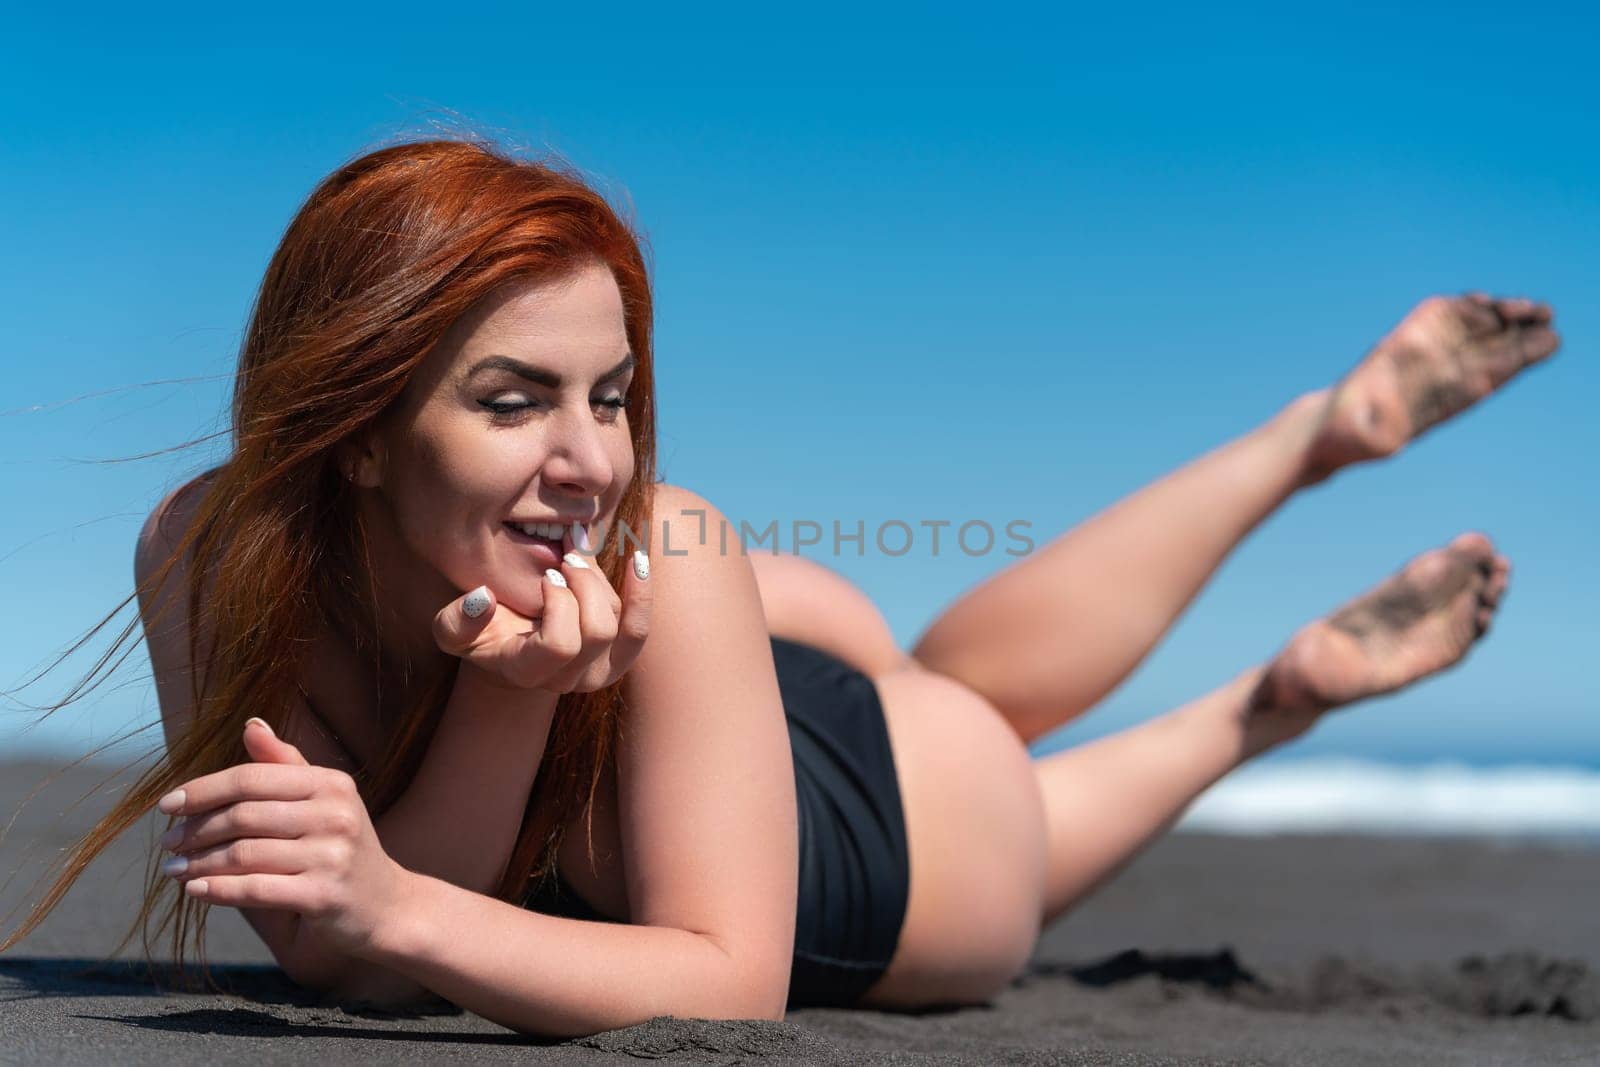 Portrait of happy sunbathing woman on sandy beach with eyes closed. Front view of redhead woman in black one piece swimsuit lying on front with legs raised. Seductive curvy female. Focus on foreground